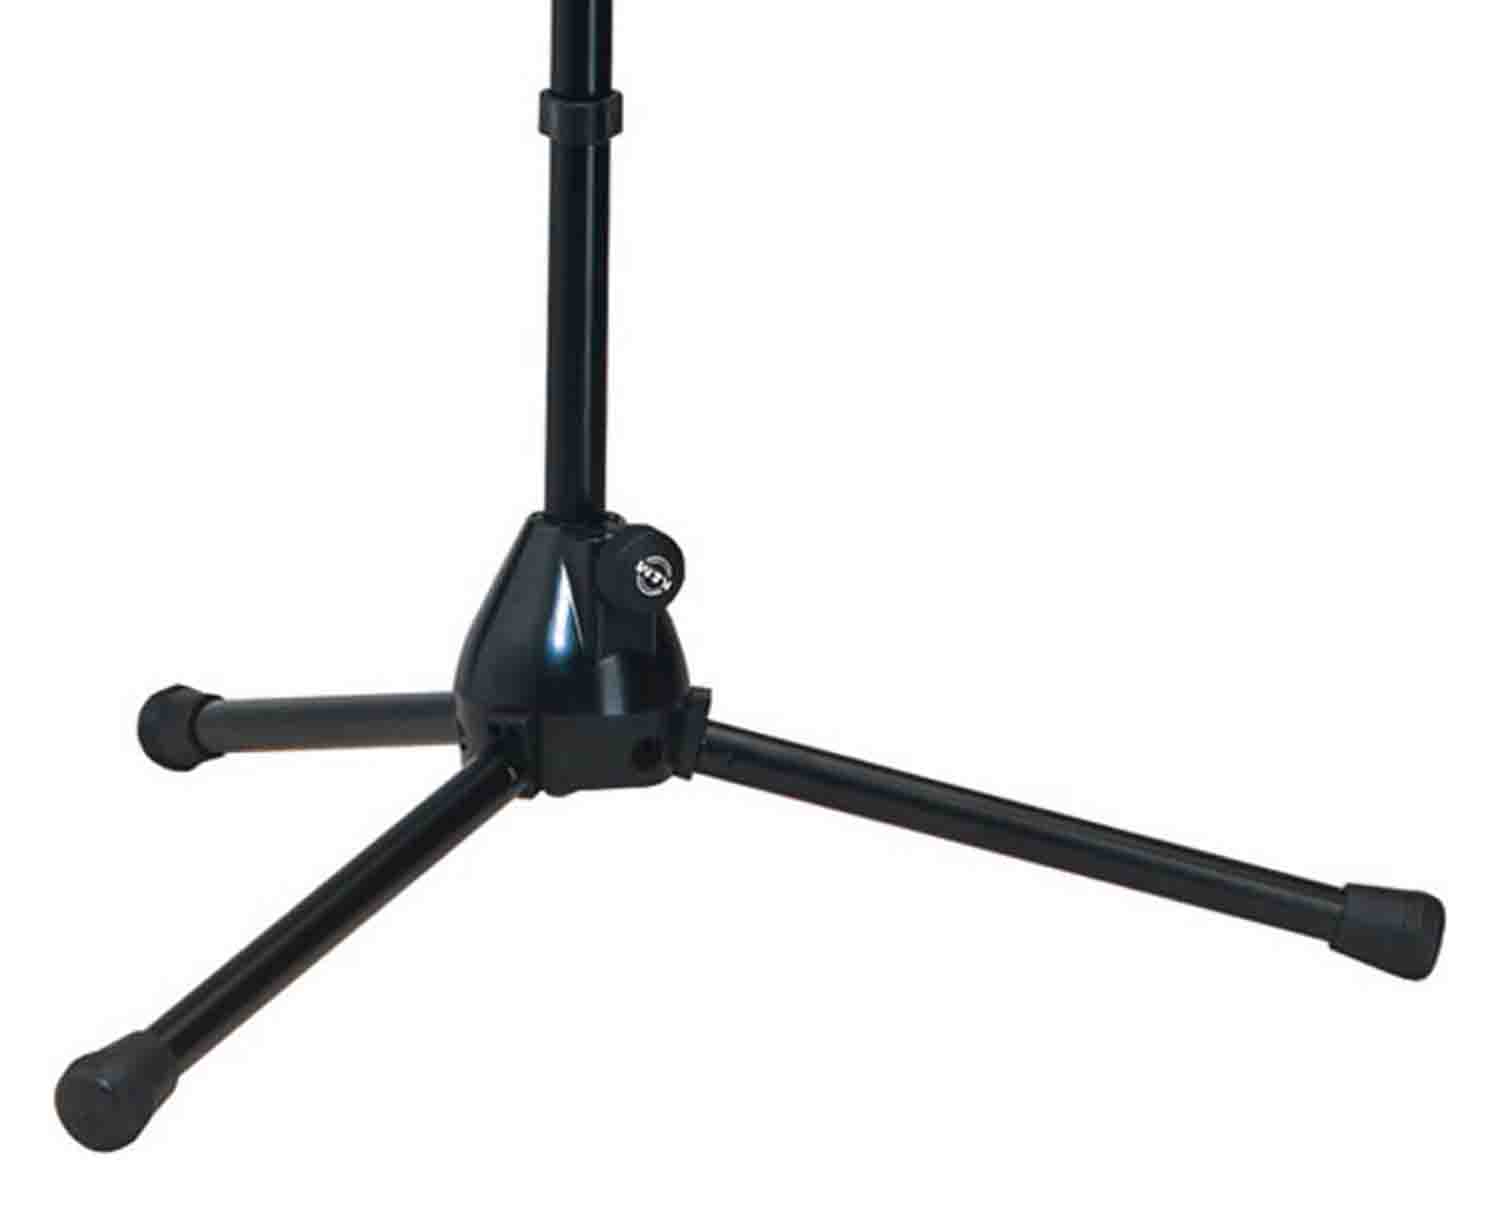 K&M 25900.500.55 Low Tripod Microphone Stand with Adjustable Boom - Black K&M